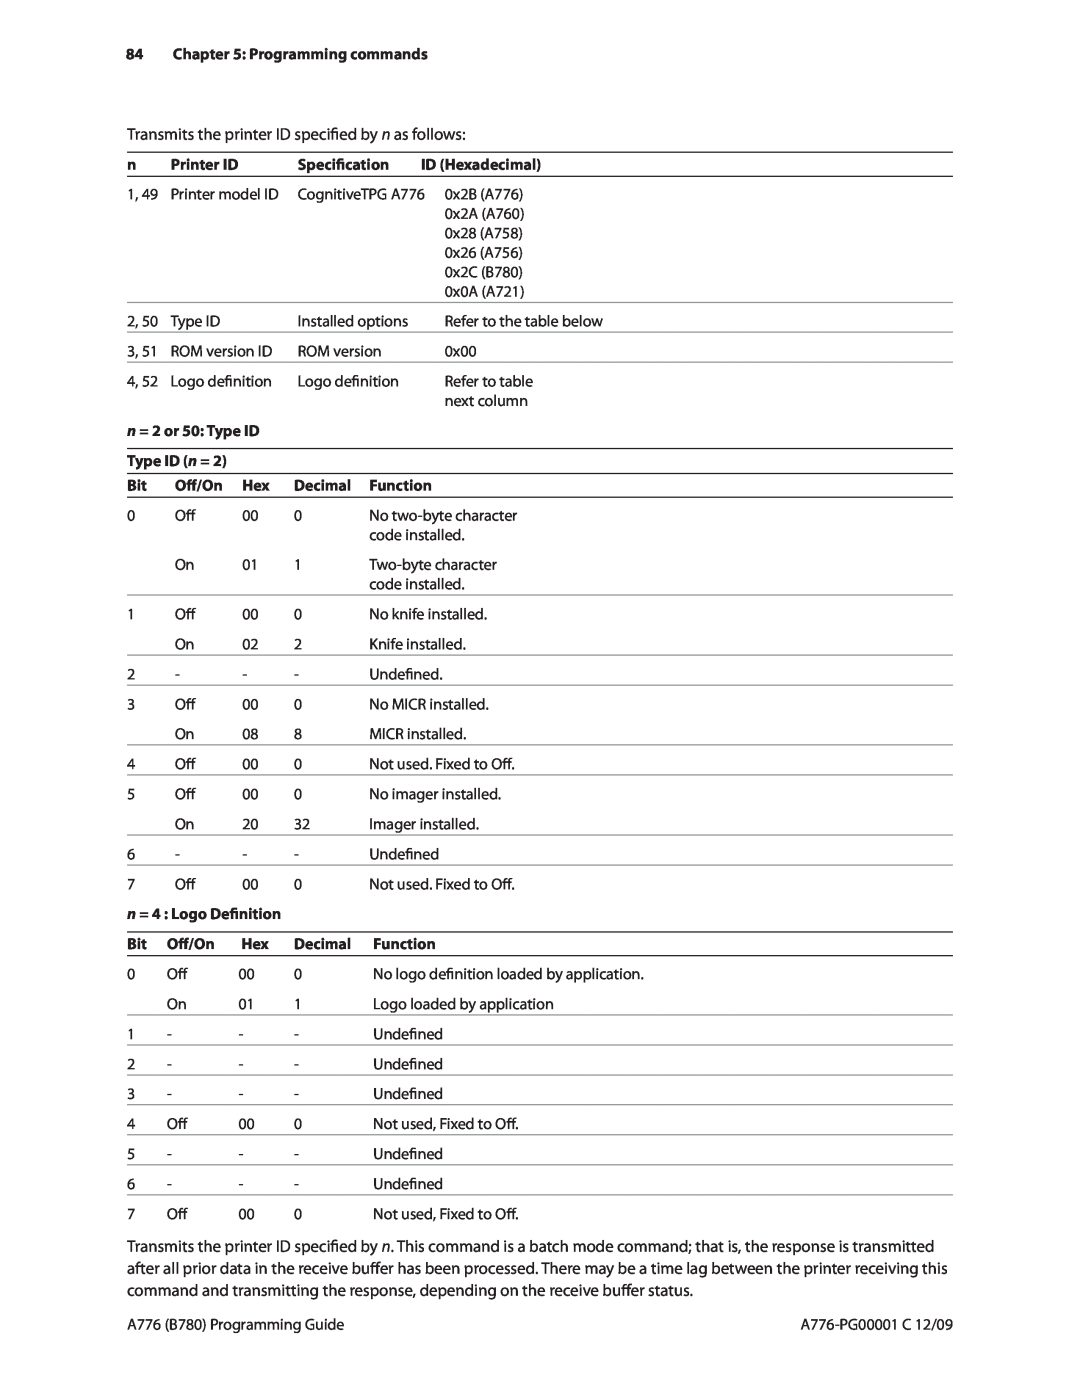 Cognitive Solutions B780, A776 manual Transmits the printer ID specified by n as follows 